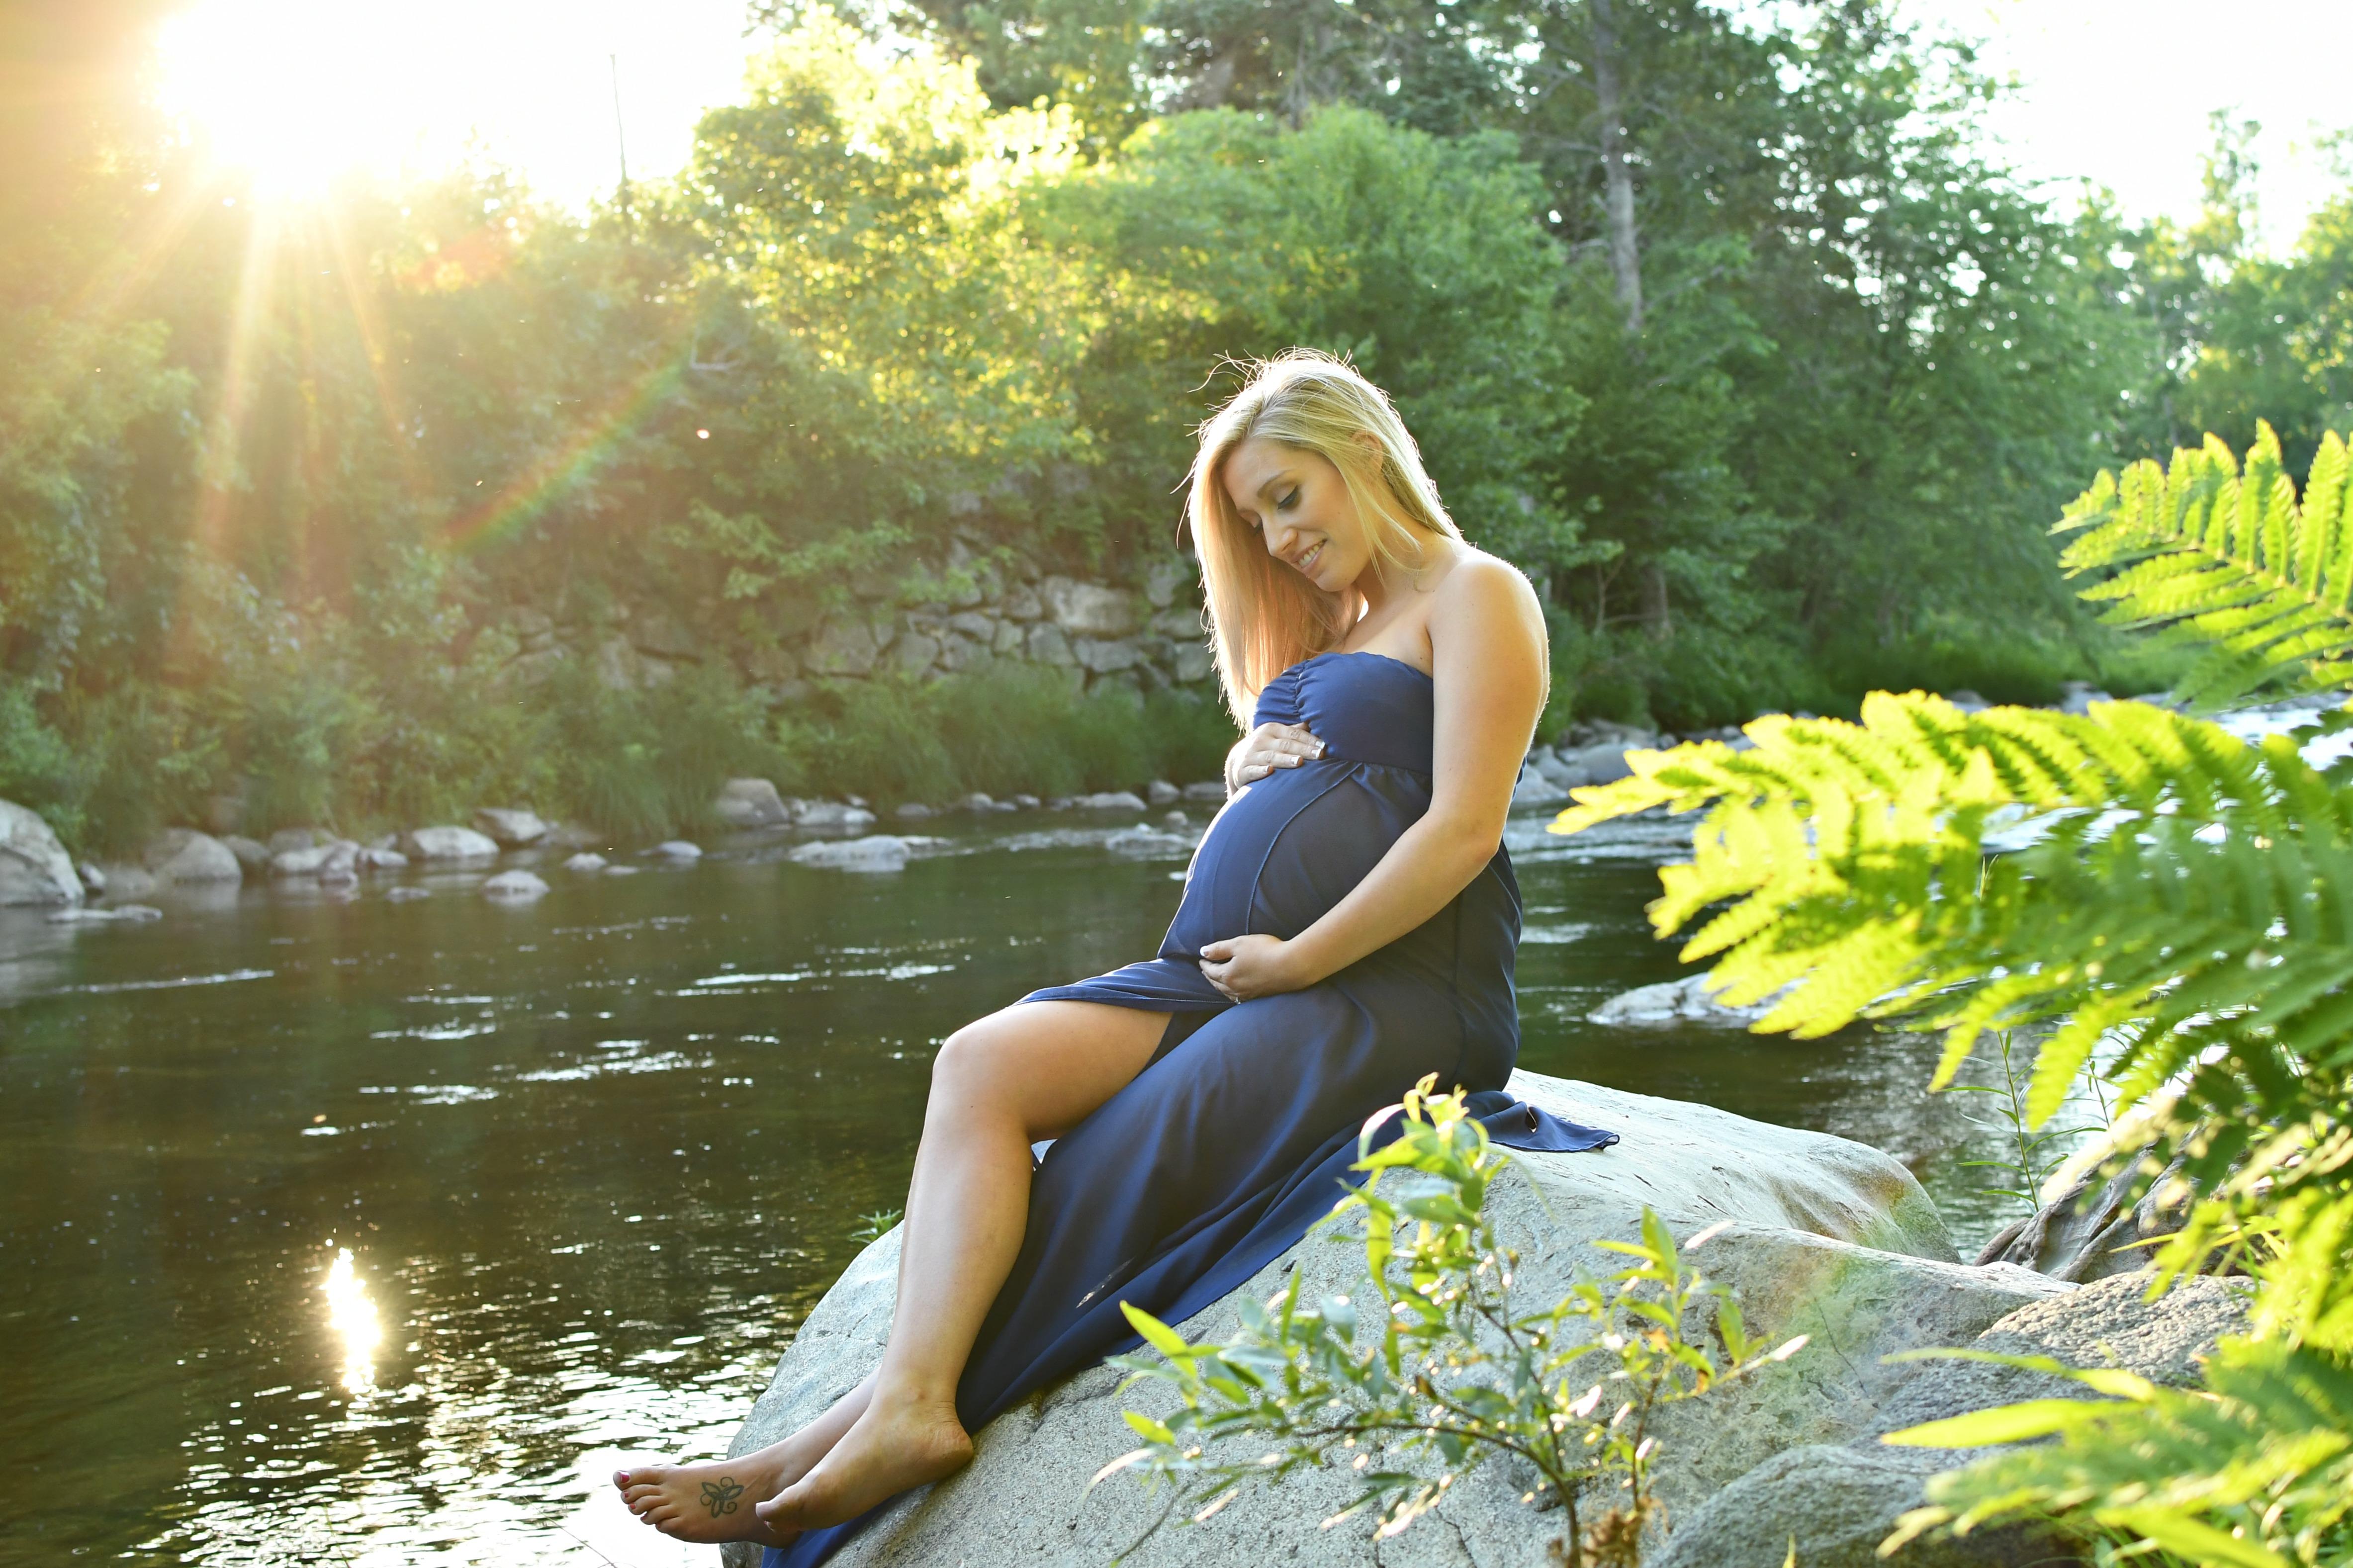 Whitefield Maternity Photographer 1 1 - Maternity Photography